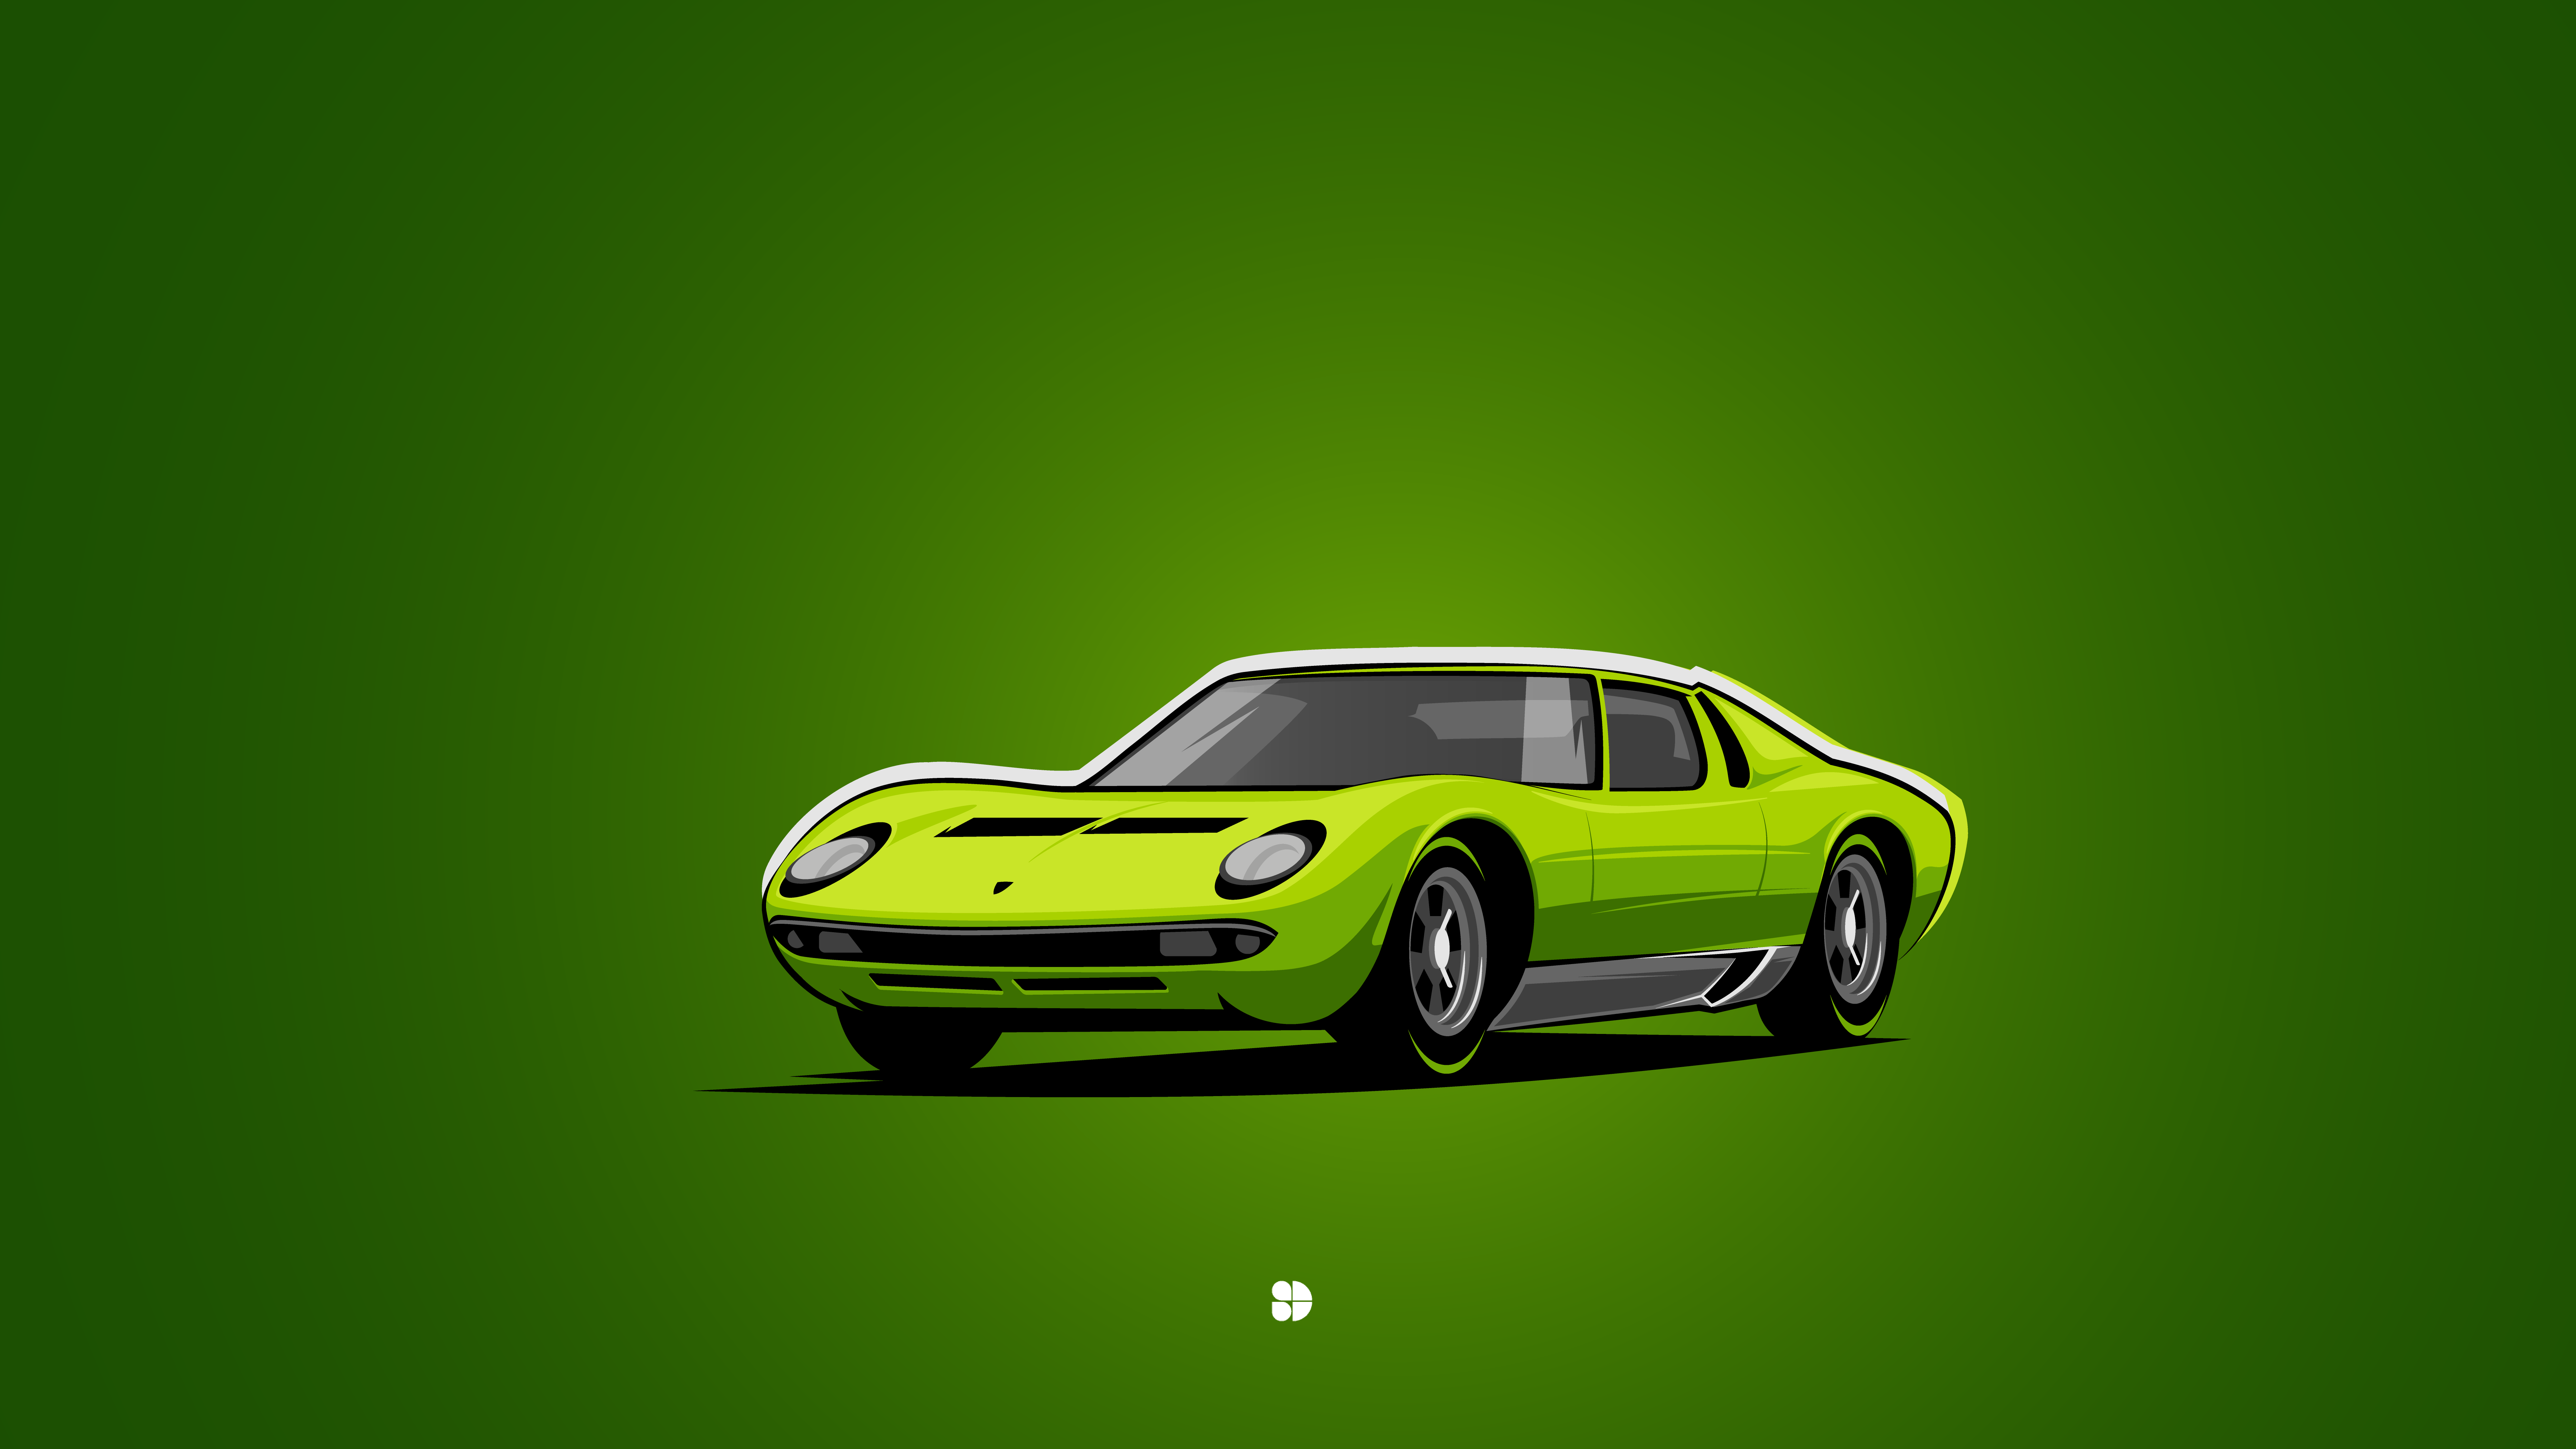 Miura 4K wallpaper for your desktop or mobile screen free and easy to download